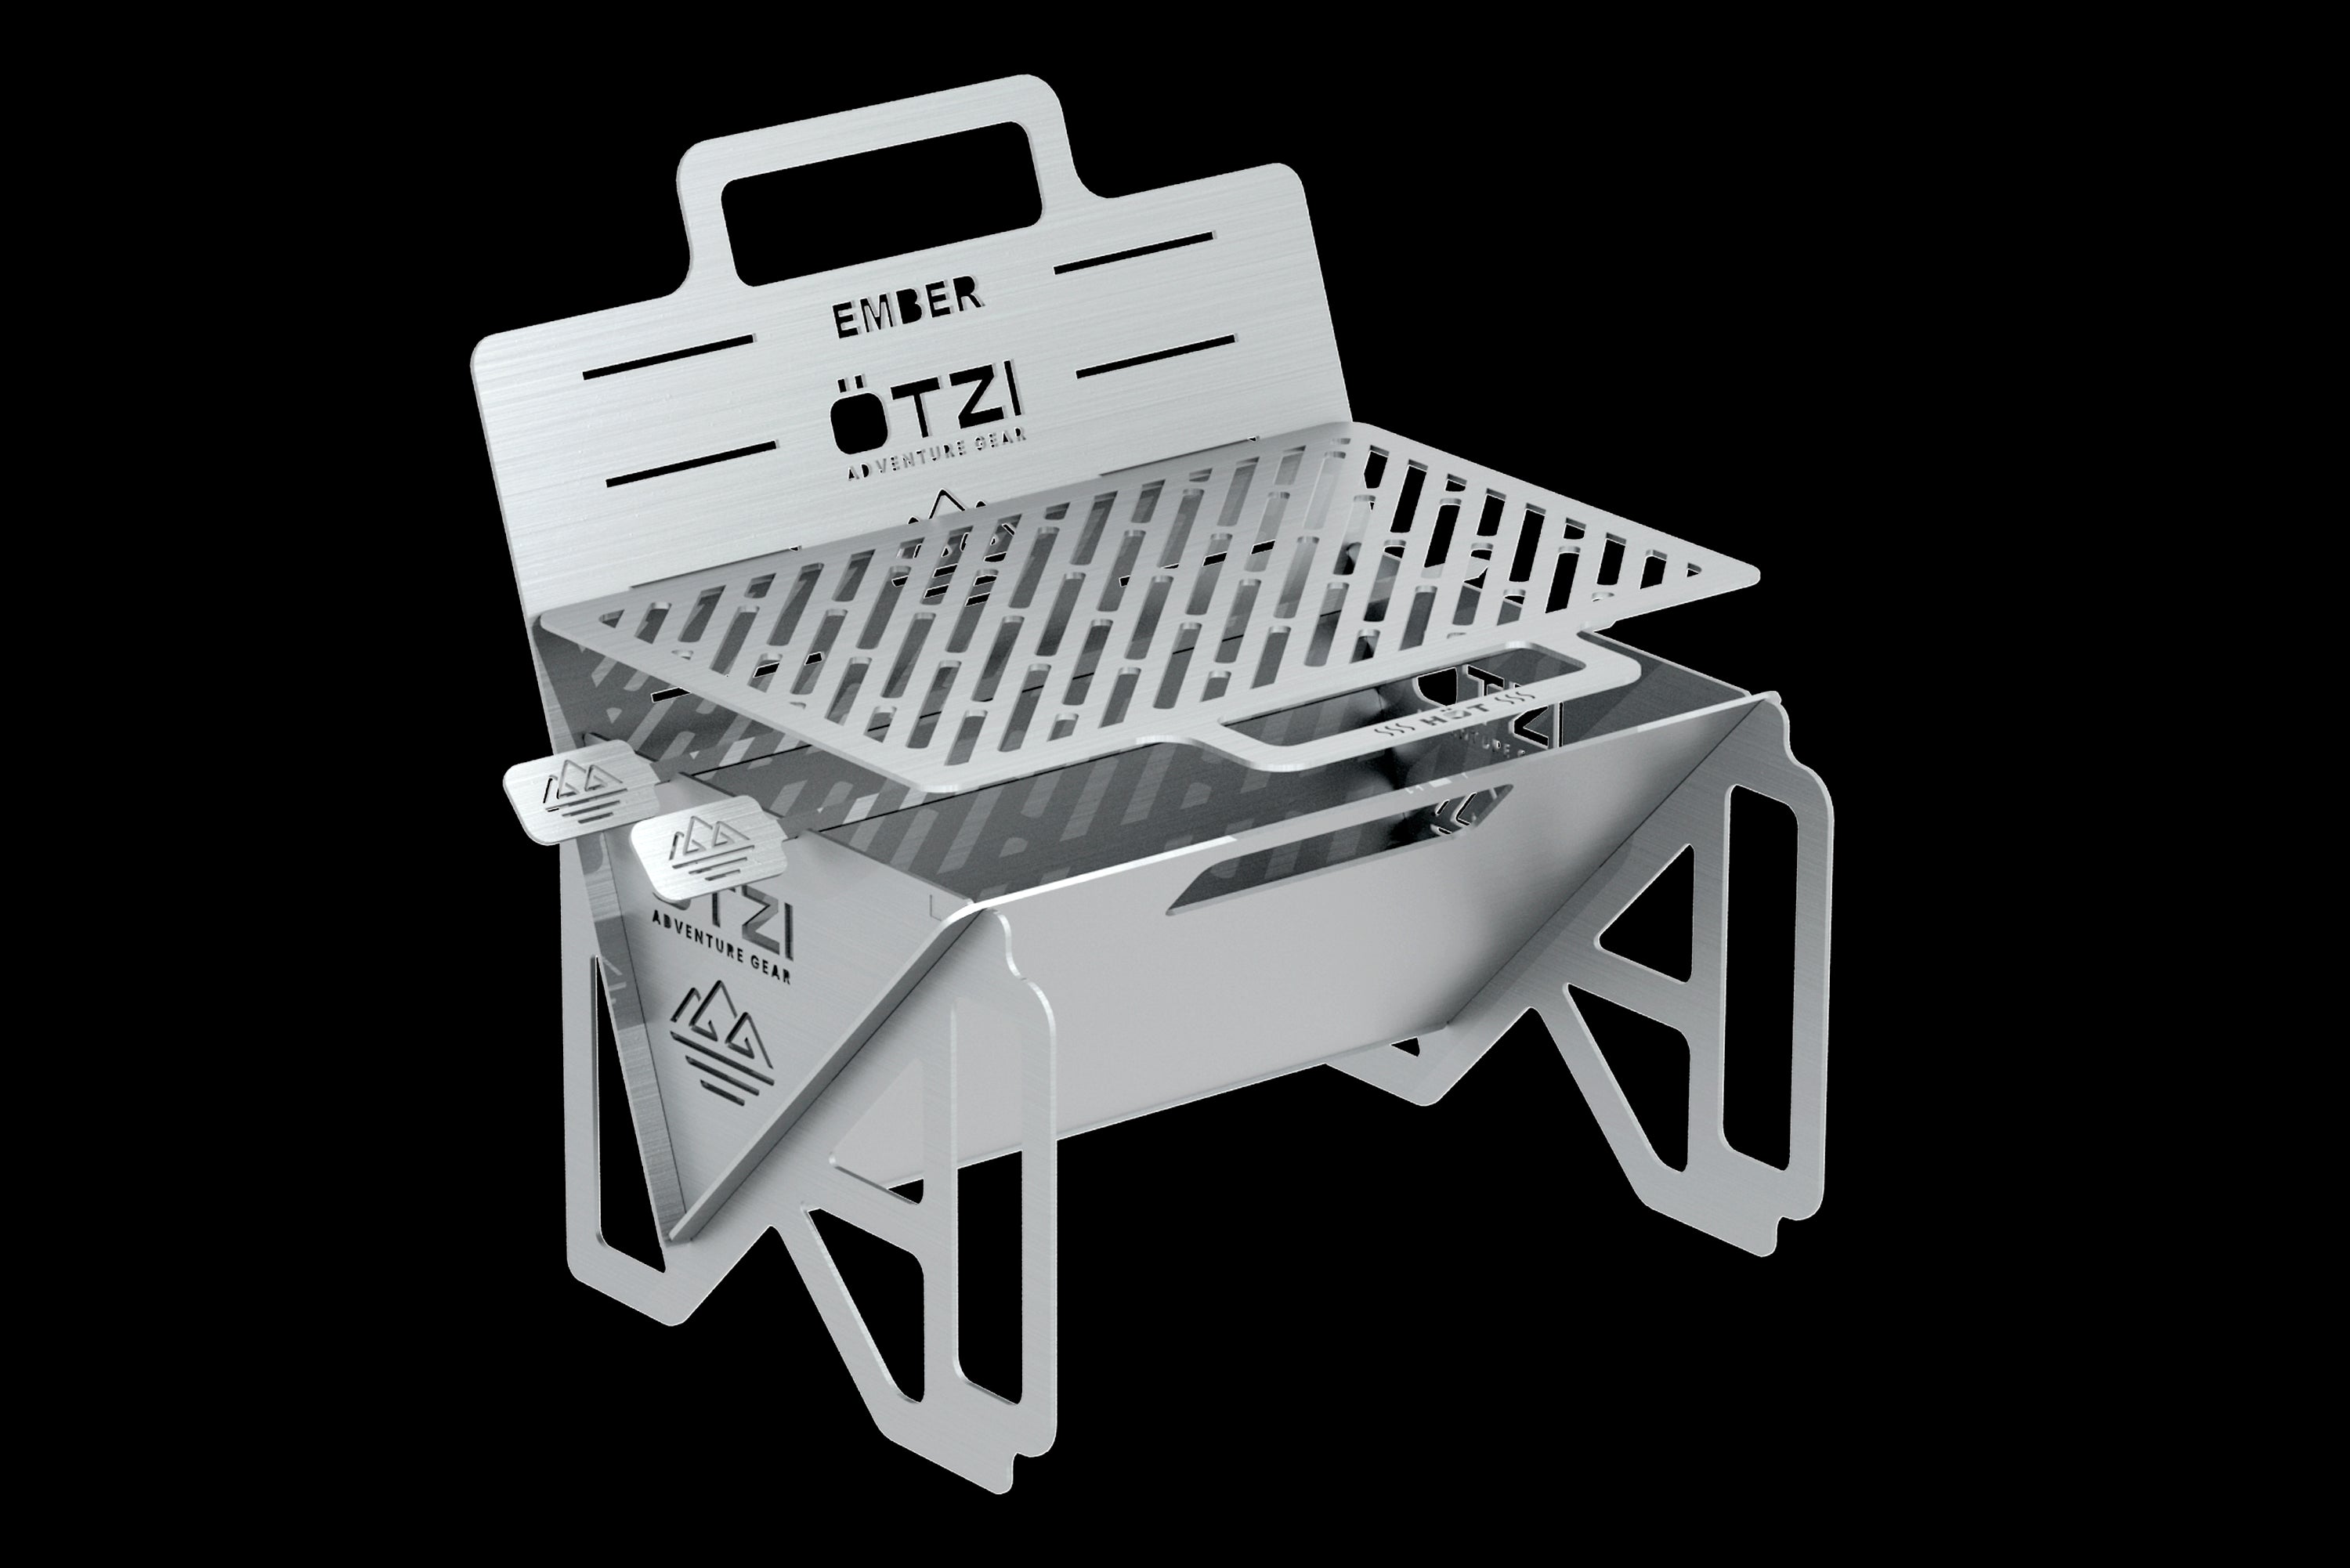 Collapsible BBQ Grill and Fire Pit. Perfect for Camping the -  Israel